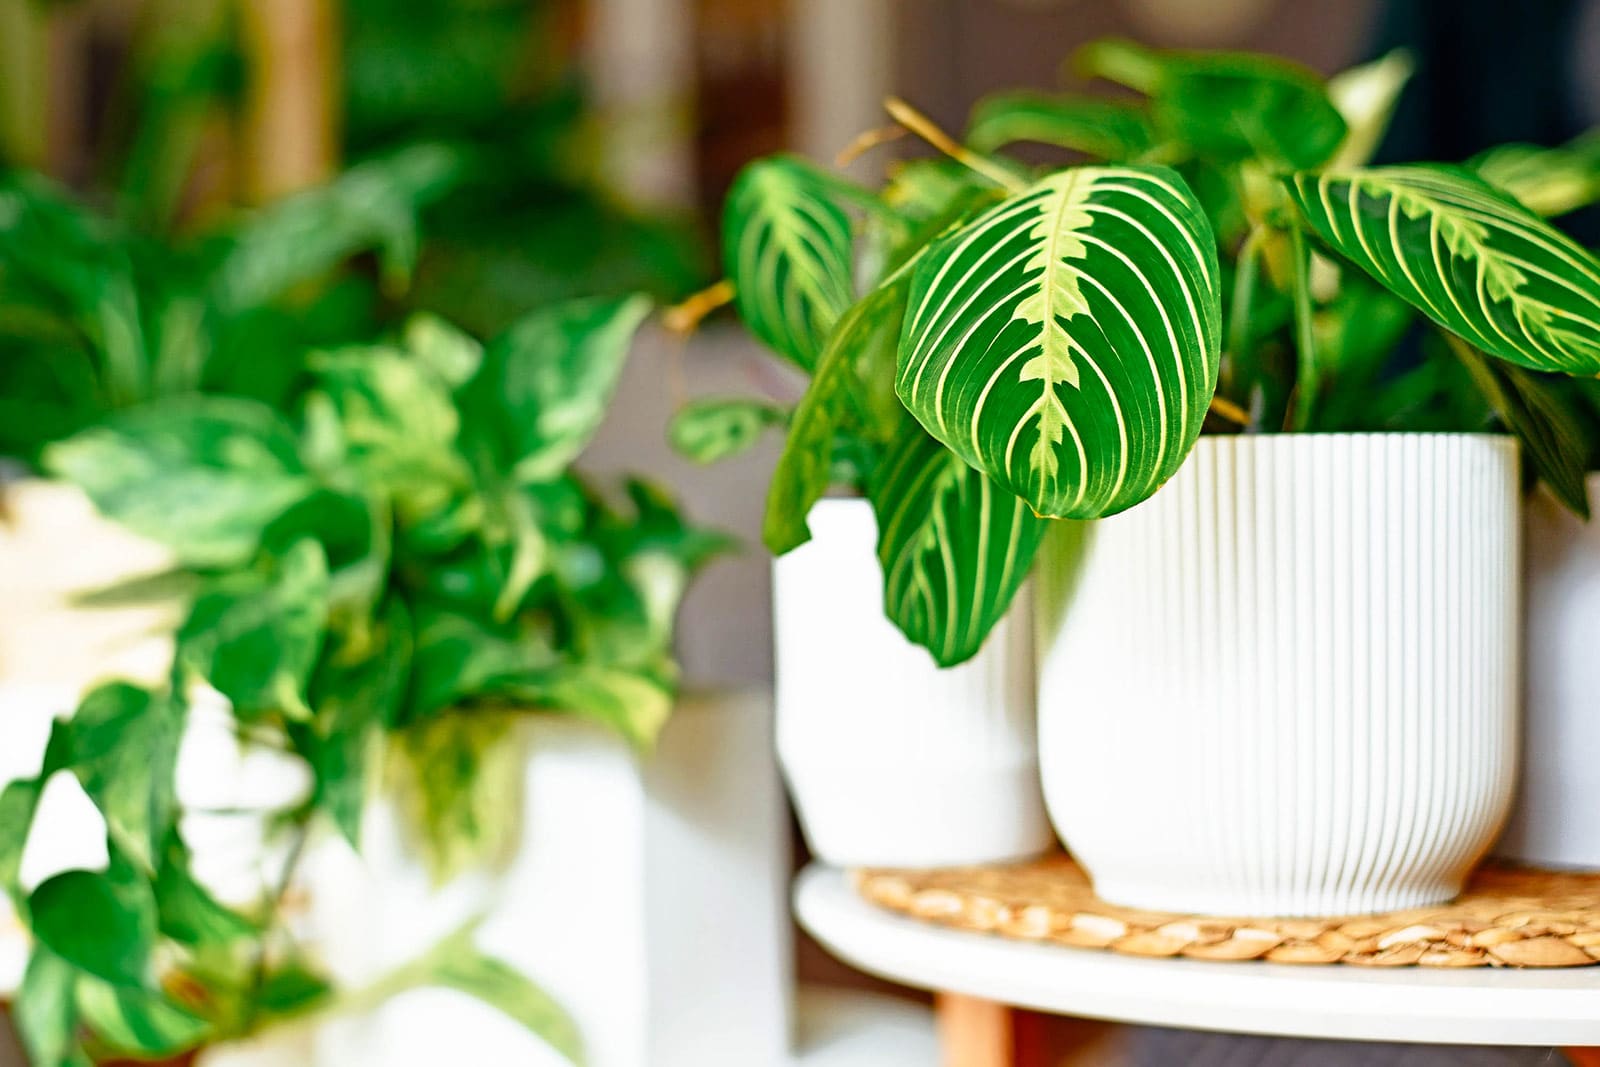 Green Maranta prayer plant in a white ribbed pot on a side table with more houseplants out of focus in the background